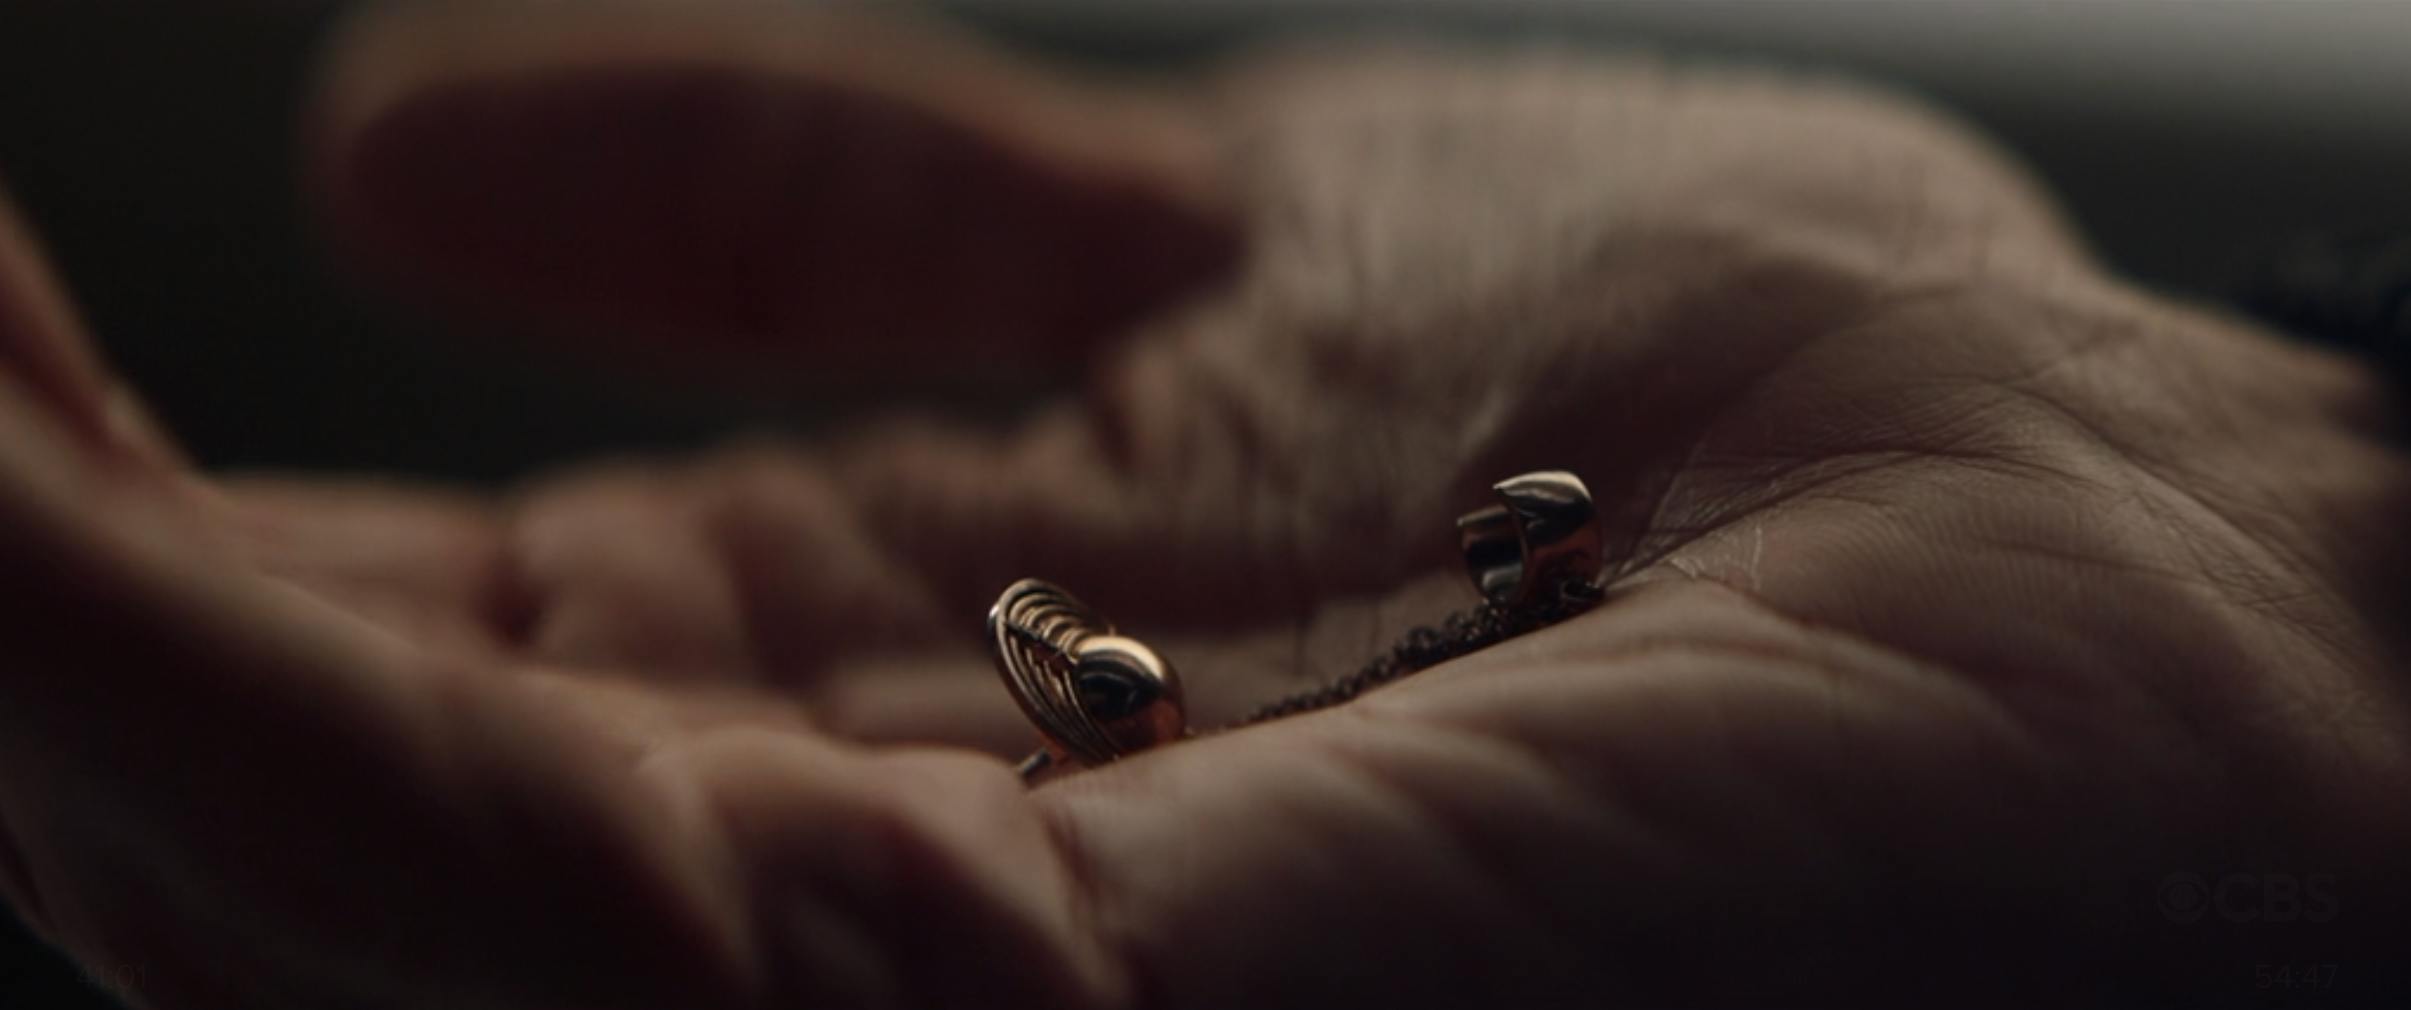 A close-up of Ro Laren's Bajoran earring in the palm of Picard's hand